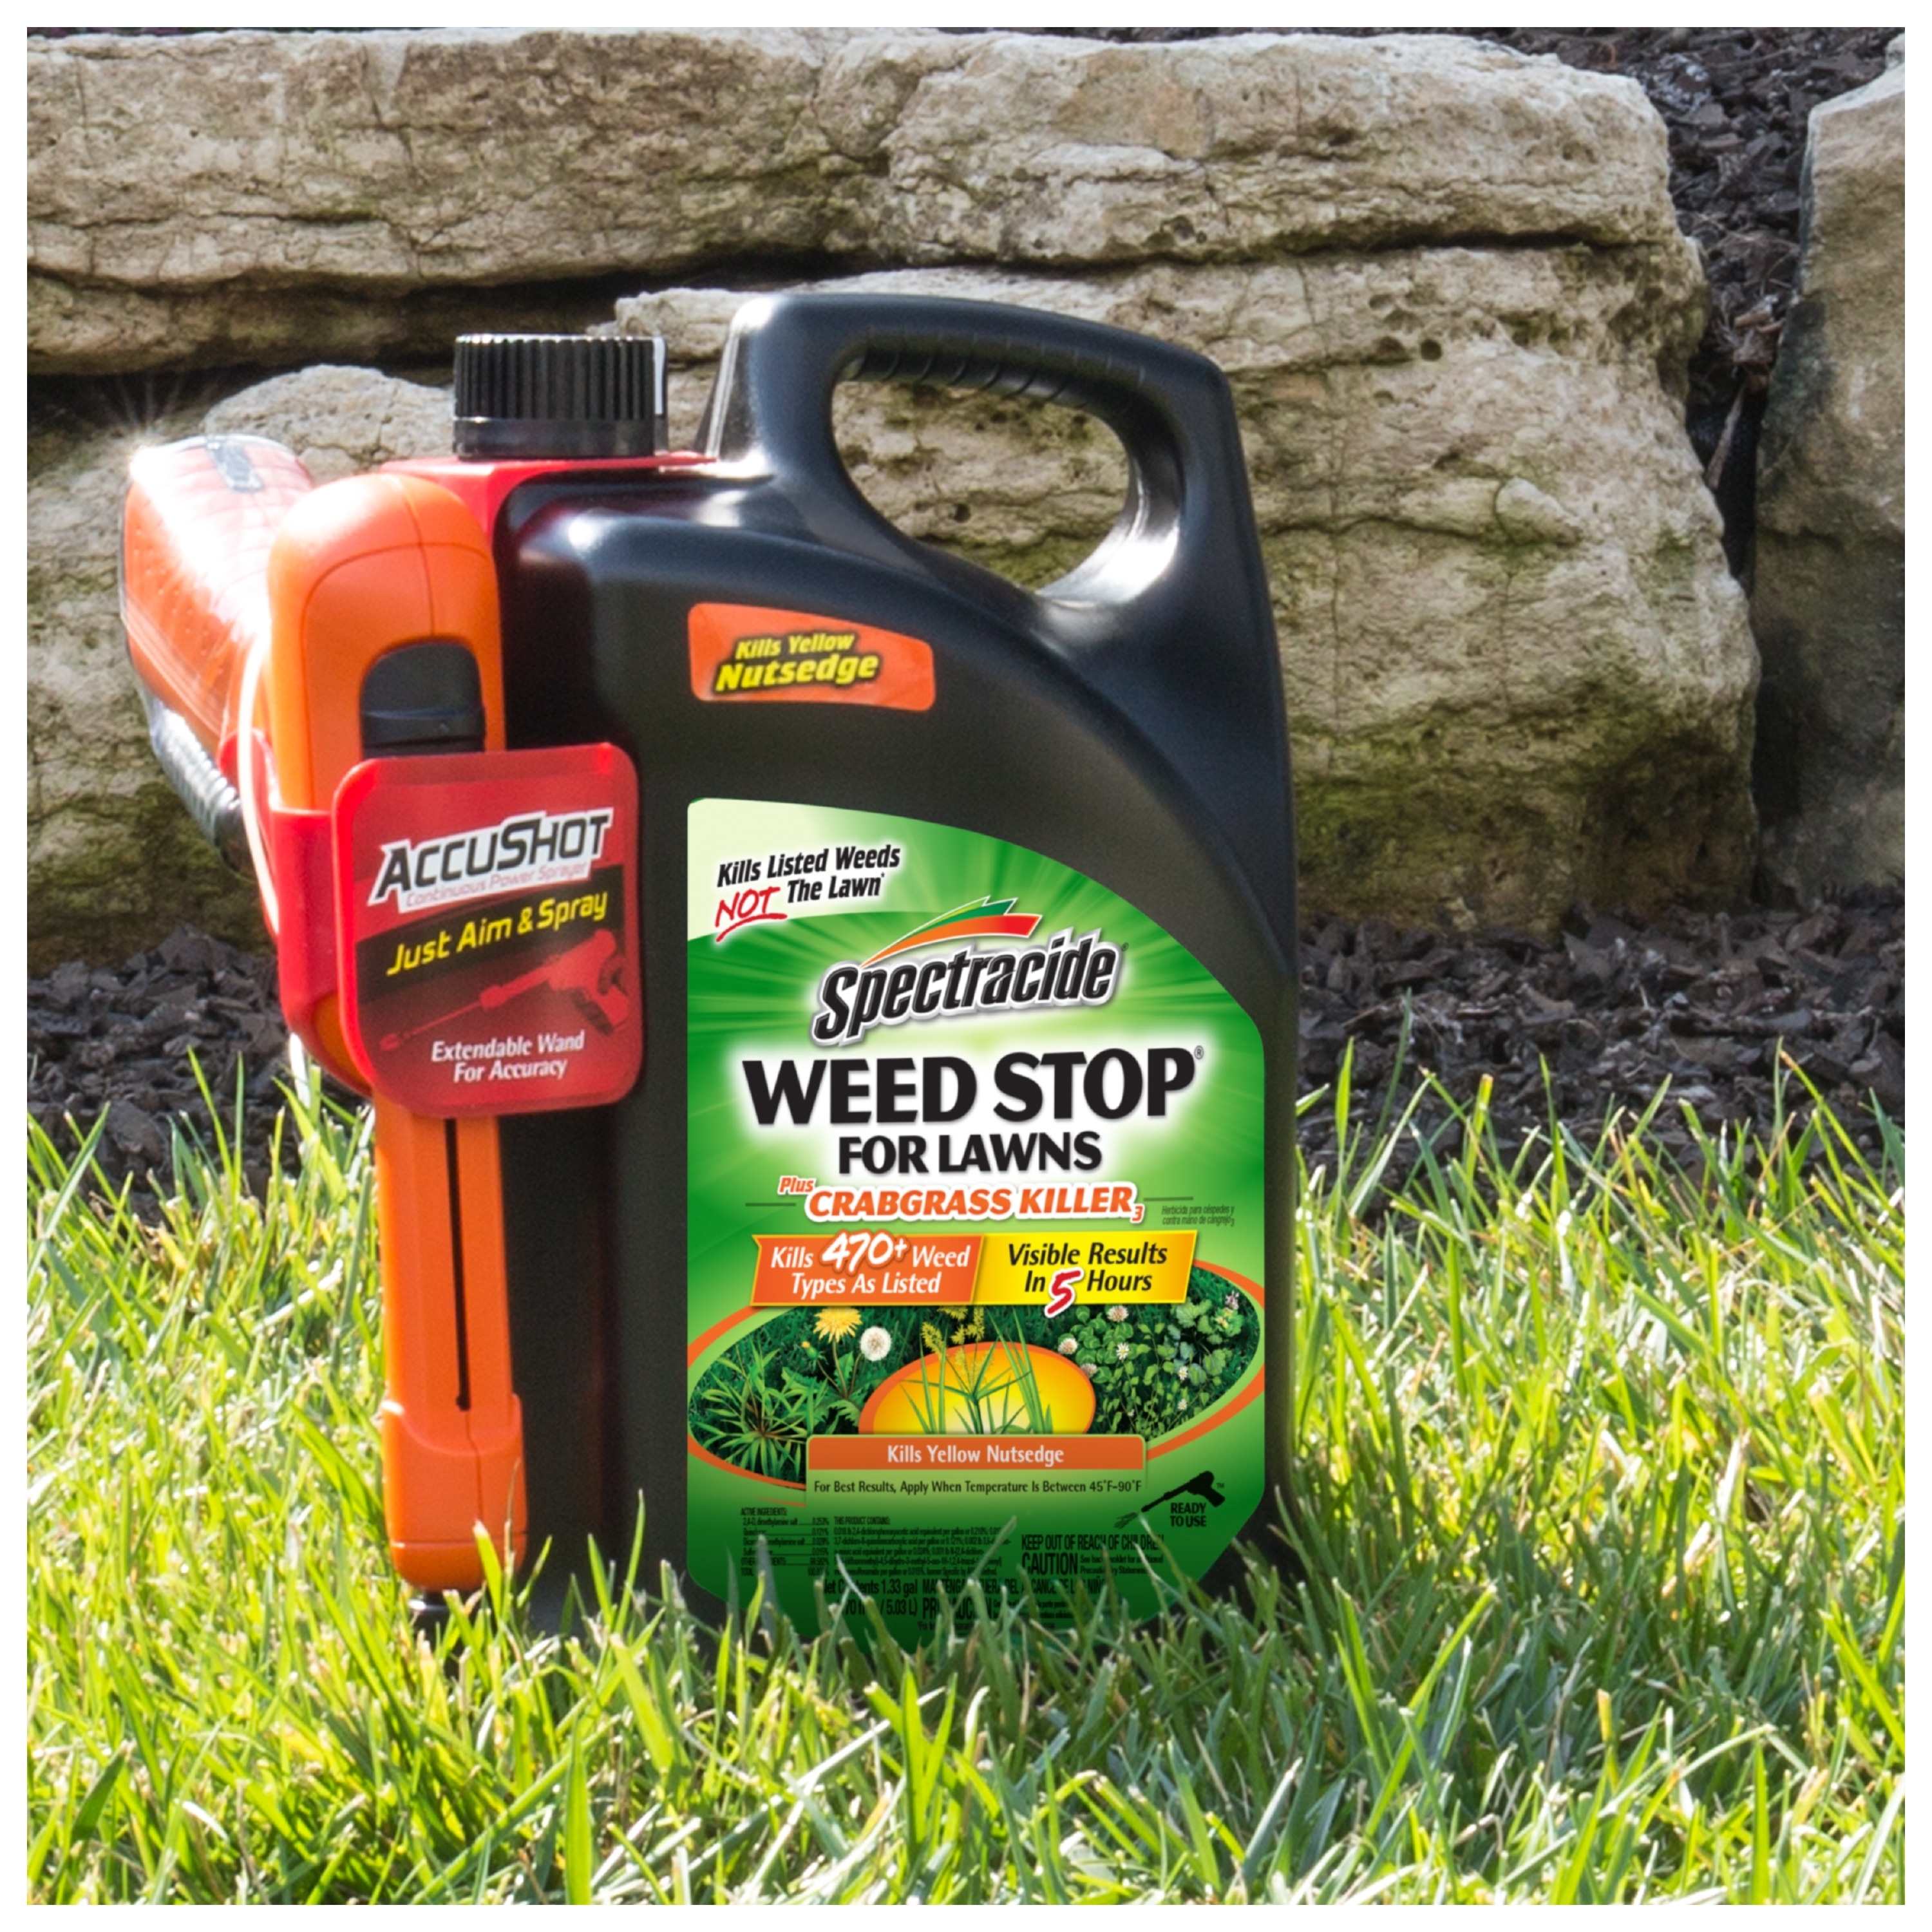 Spectracide AccuShot Weed Stop For Lawns Plus Crabgrass 1.33-Gallon (s ...